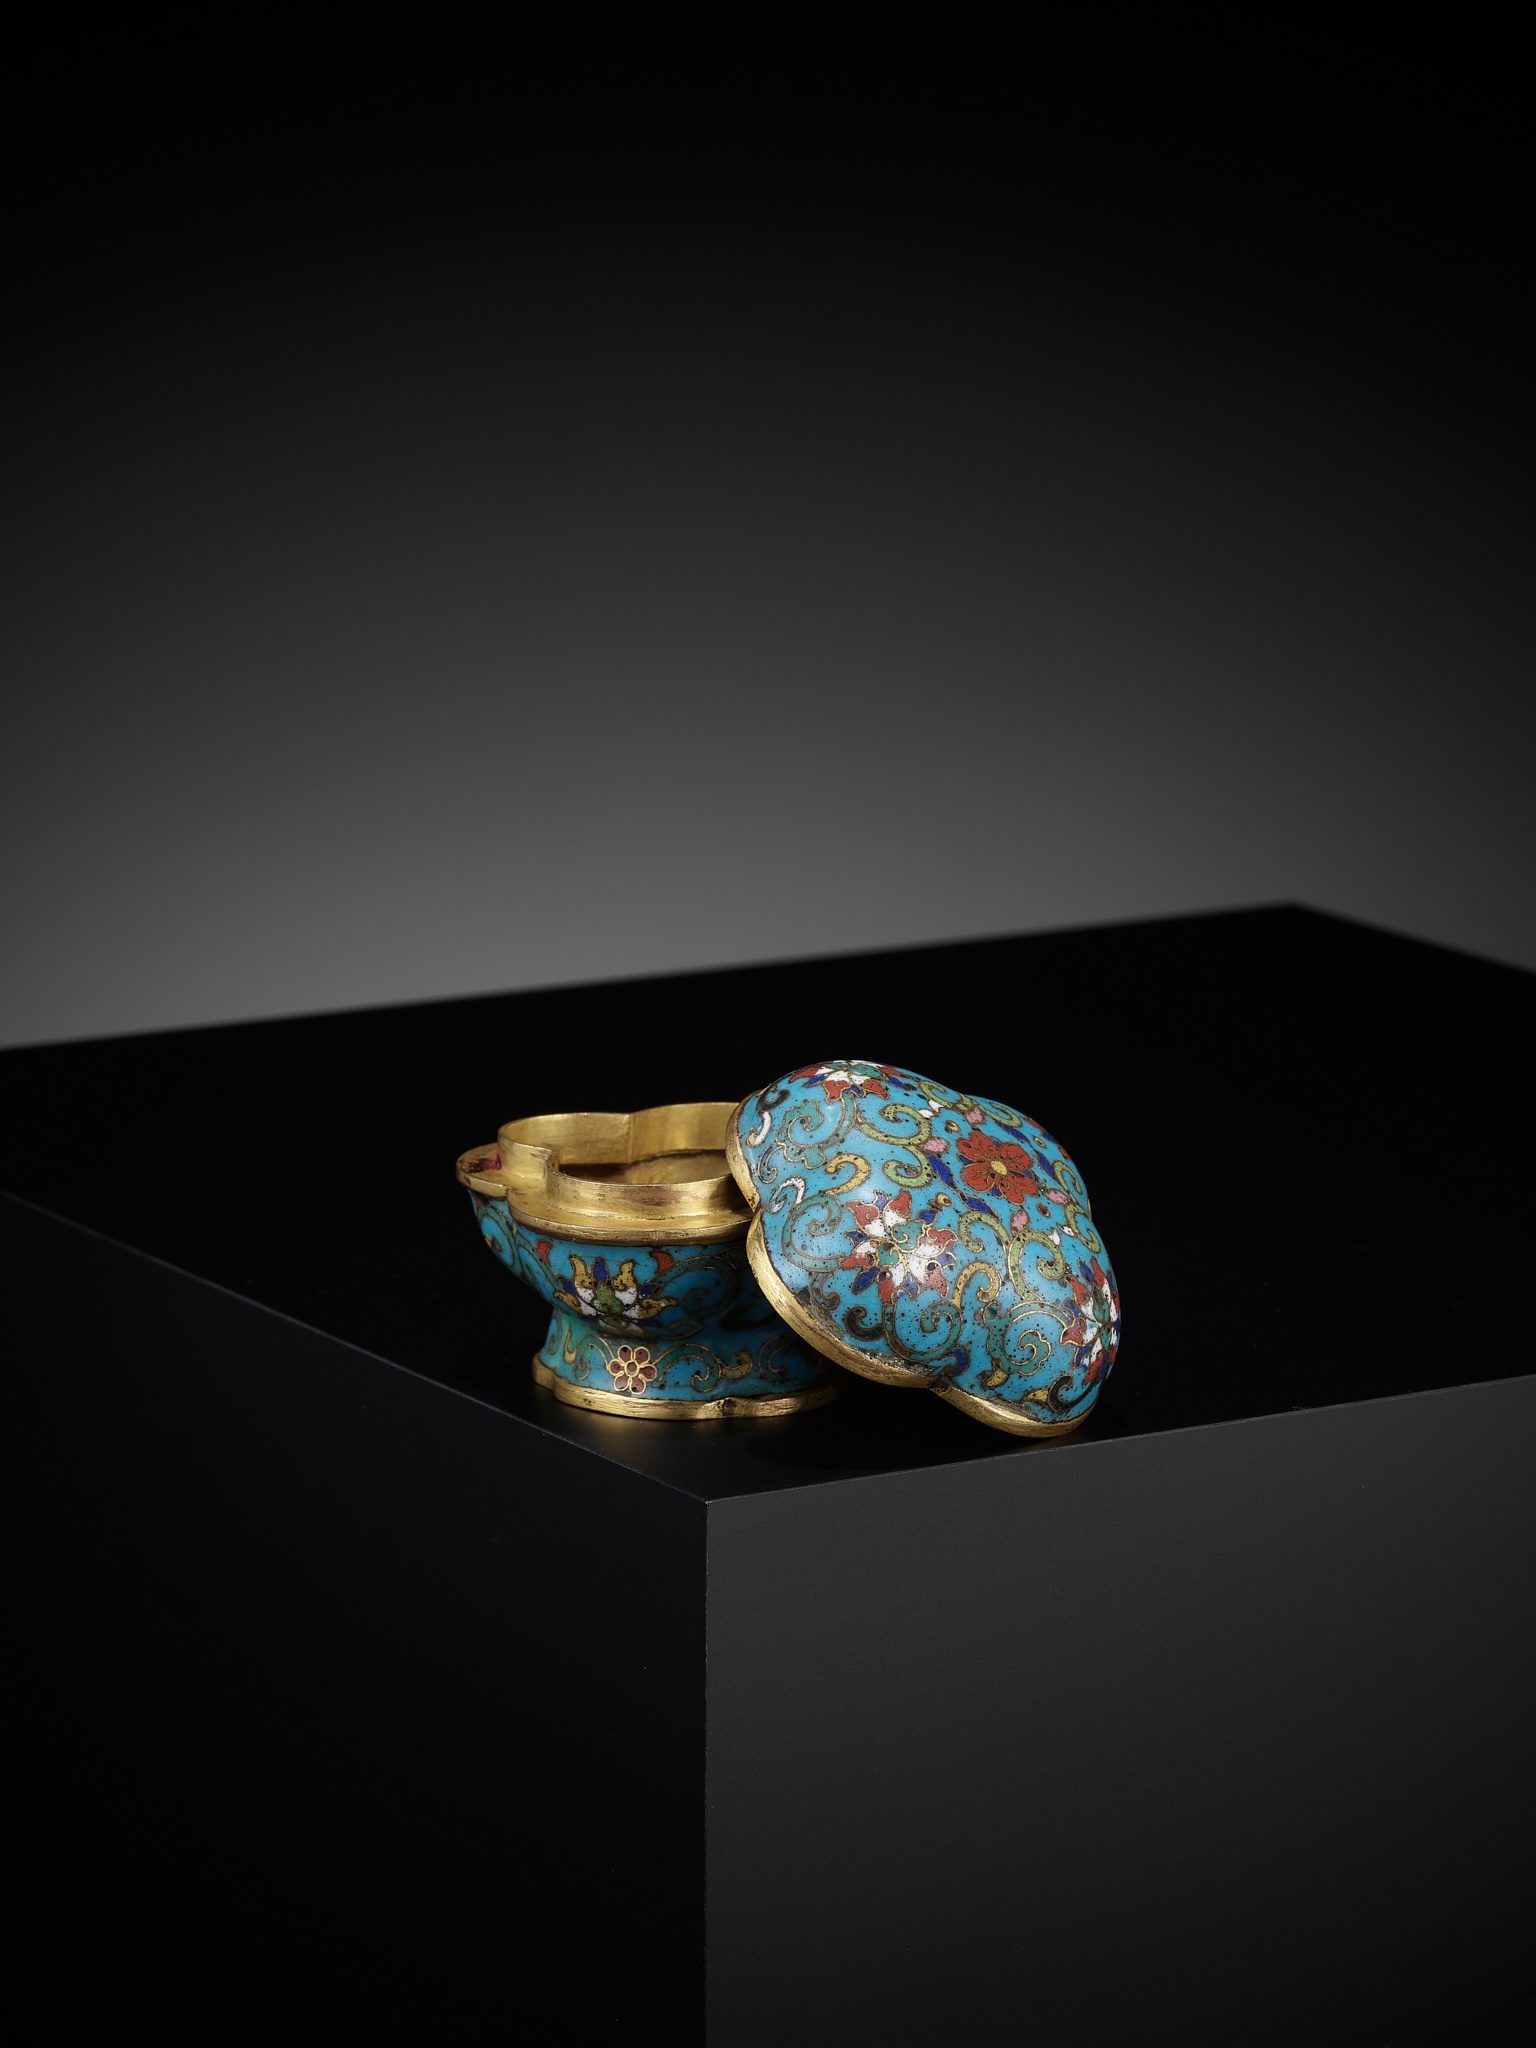 AN EXTREMELY RARE CLOISONNE ENAMEL QUADRILOBED BOX AND COVER, QIANLONG MARK AND OF THE PERIOD - Image 9 of 21